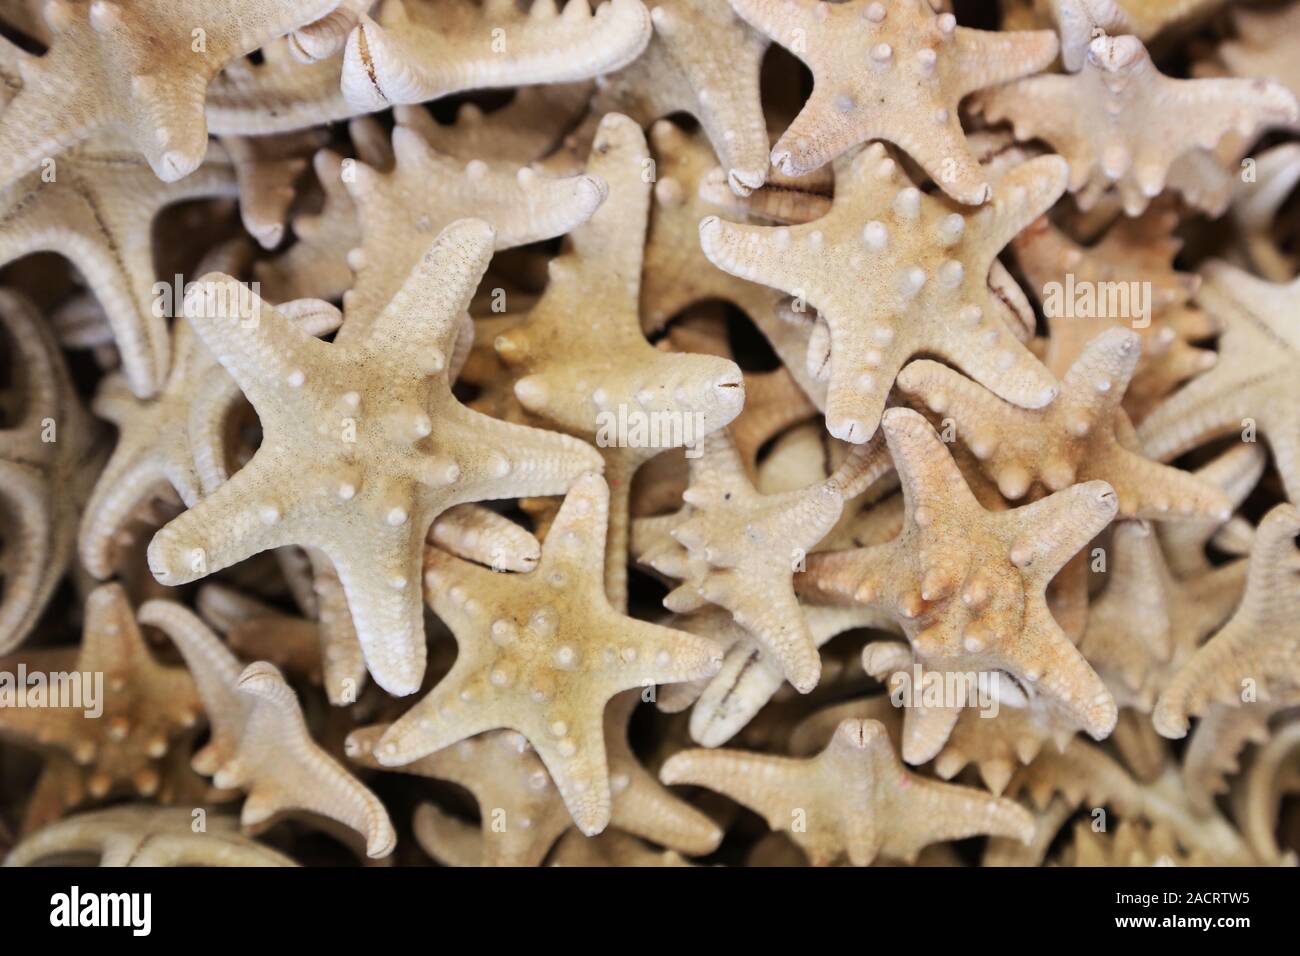 Background of sea stars with short beams. Stock Photo